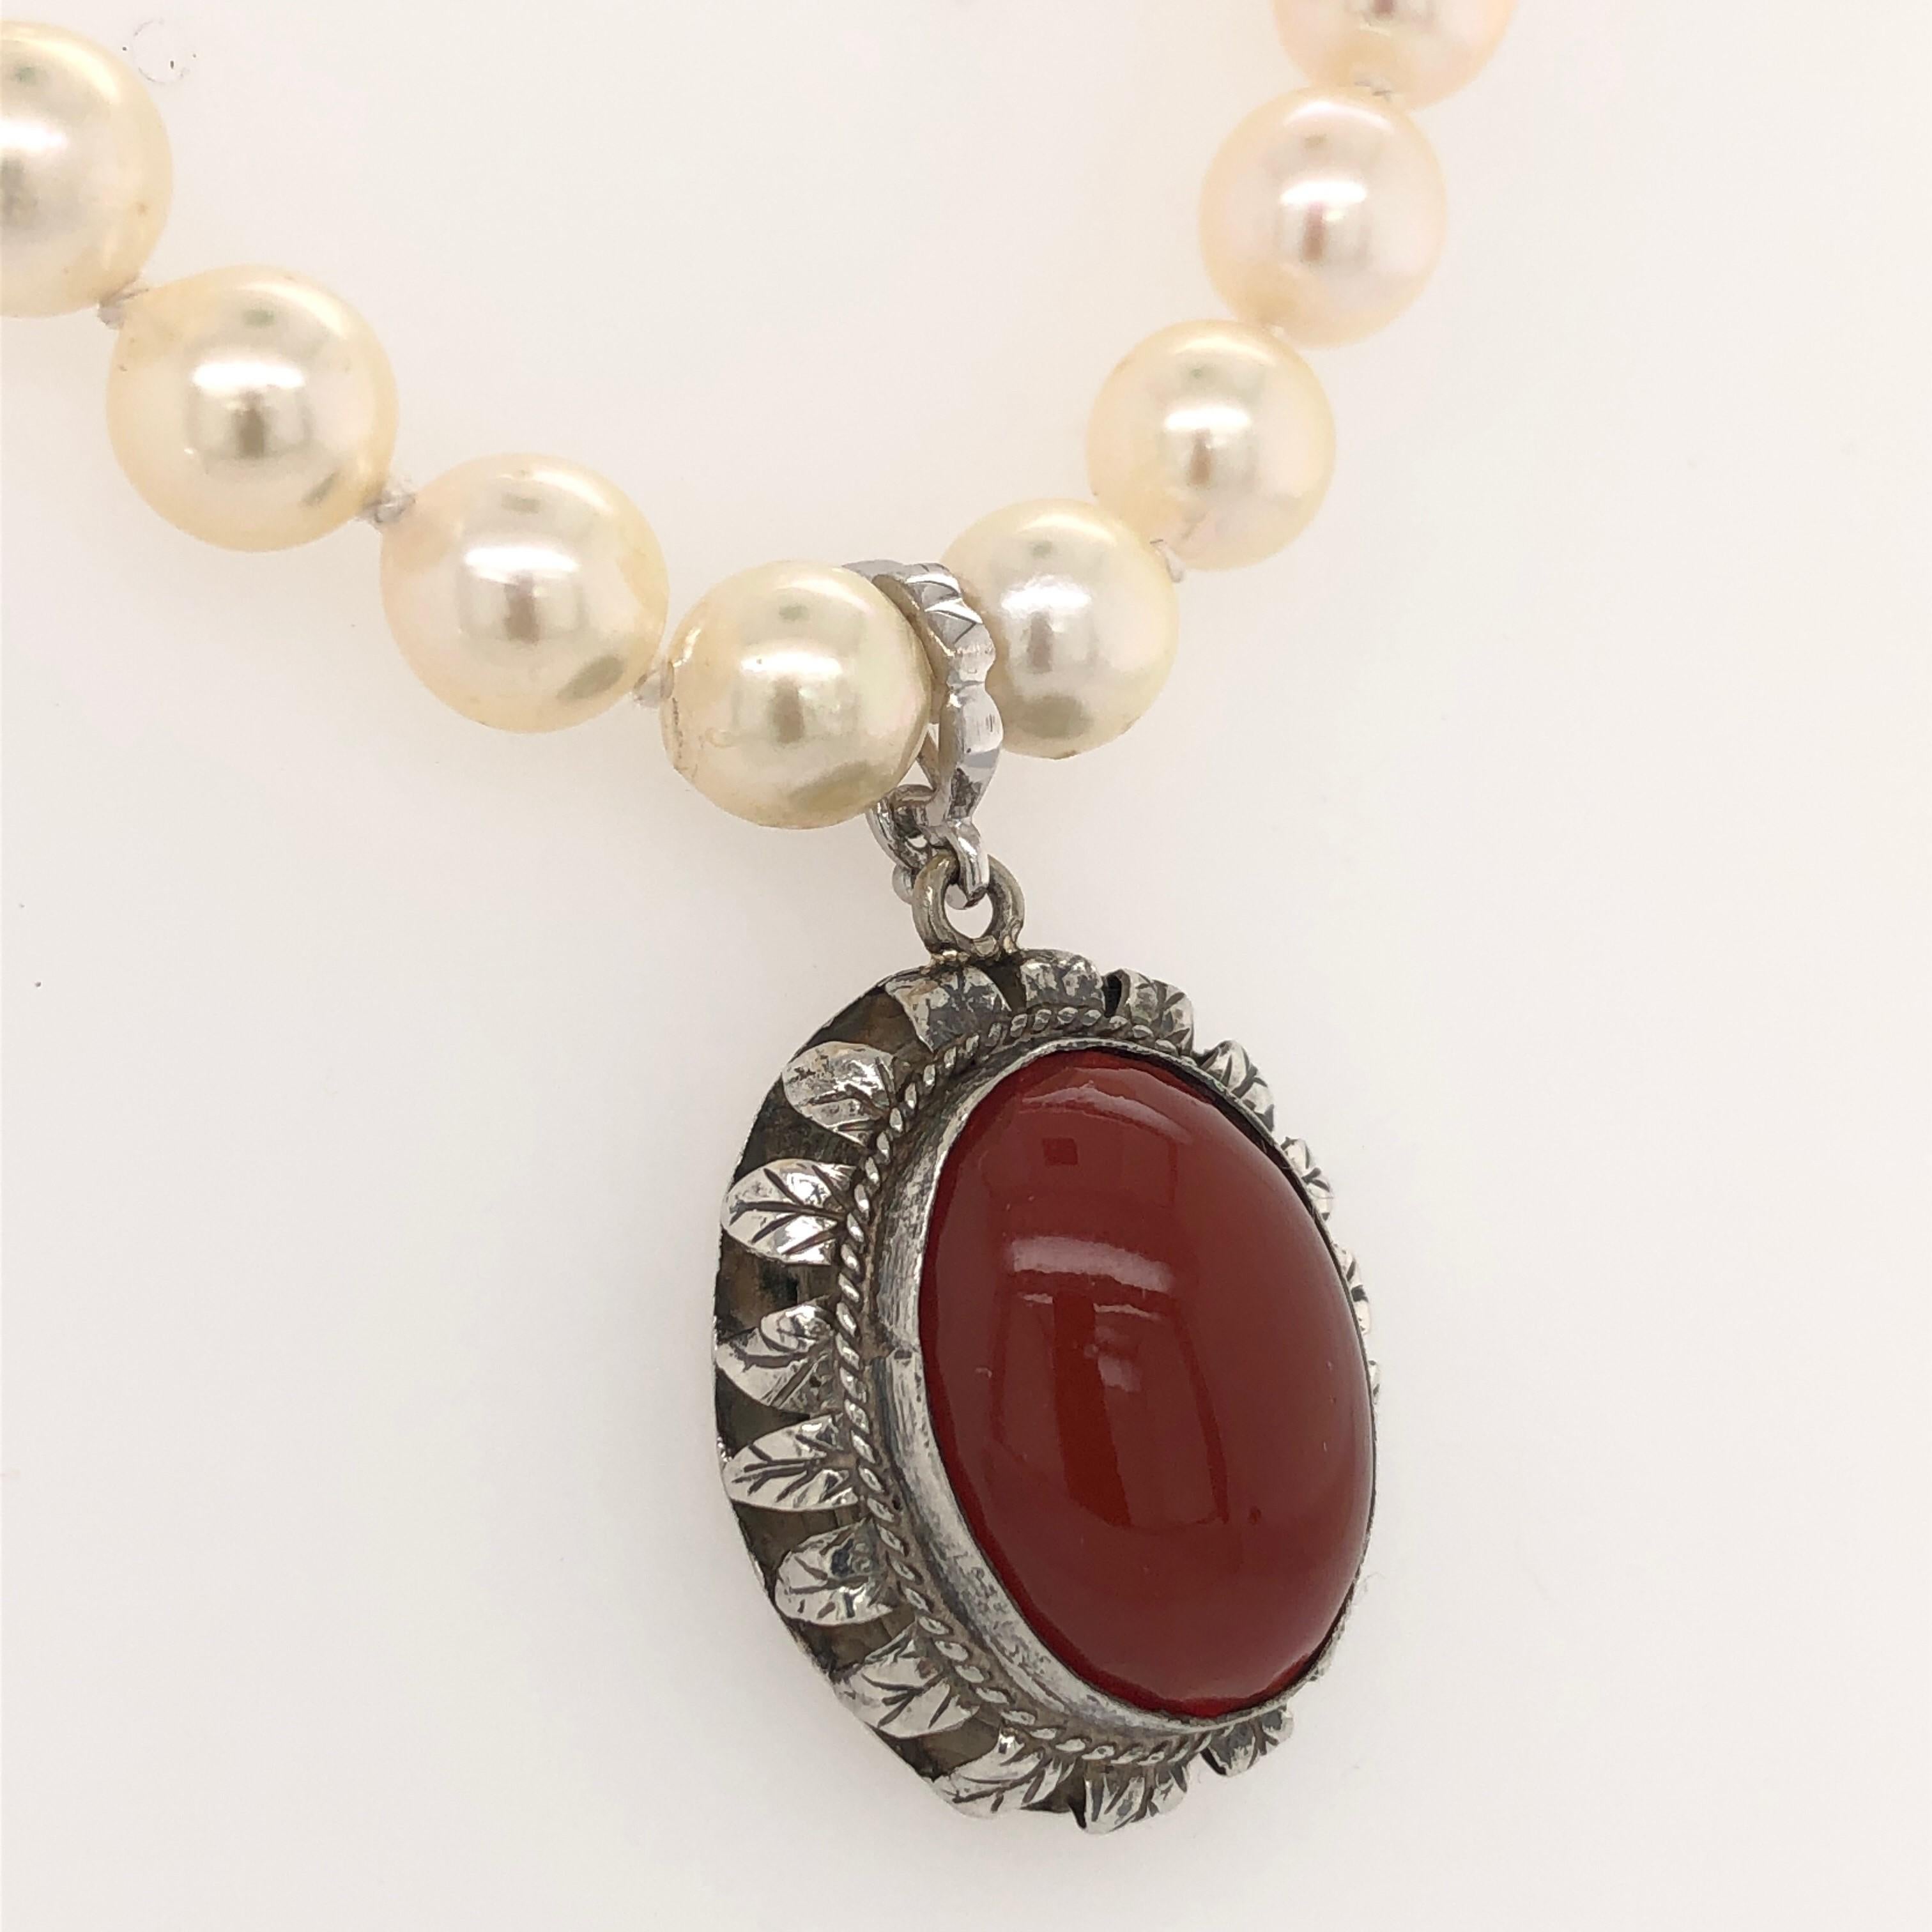 Carnelian Sterling Silver Pendant Enhancer on Akoya Pearl Strand Necklace In Excellent Condition For Sale In Mount Kisco, NY